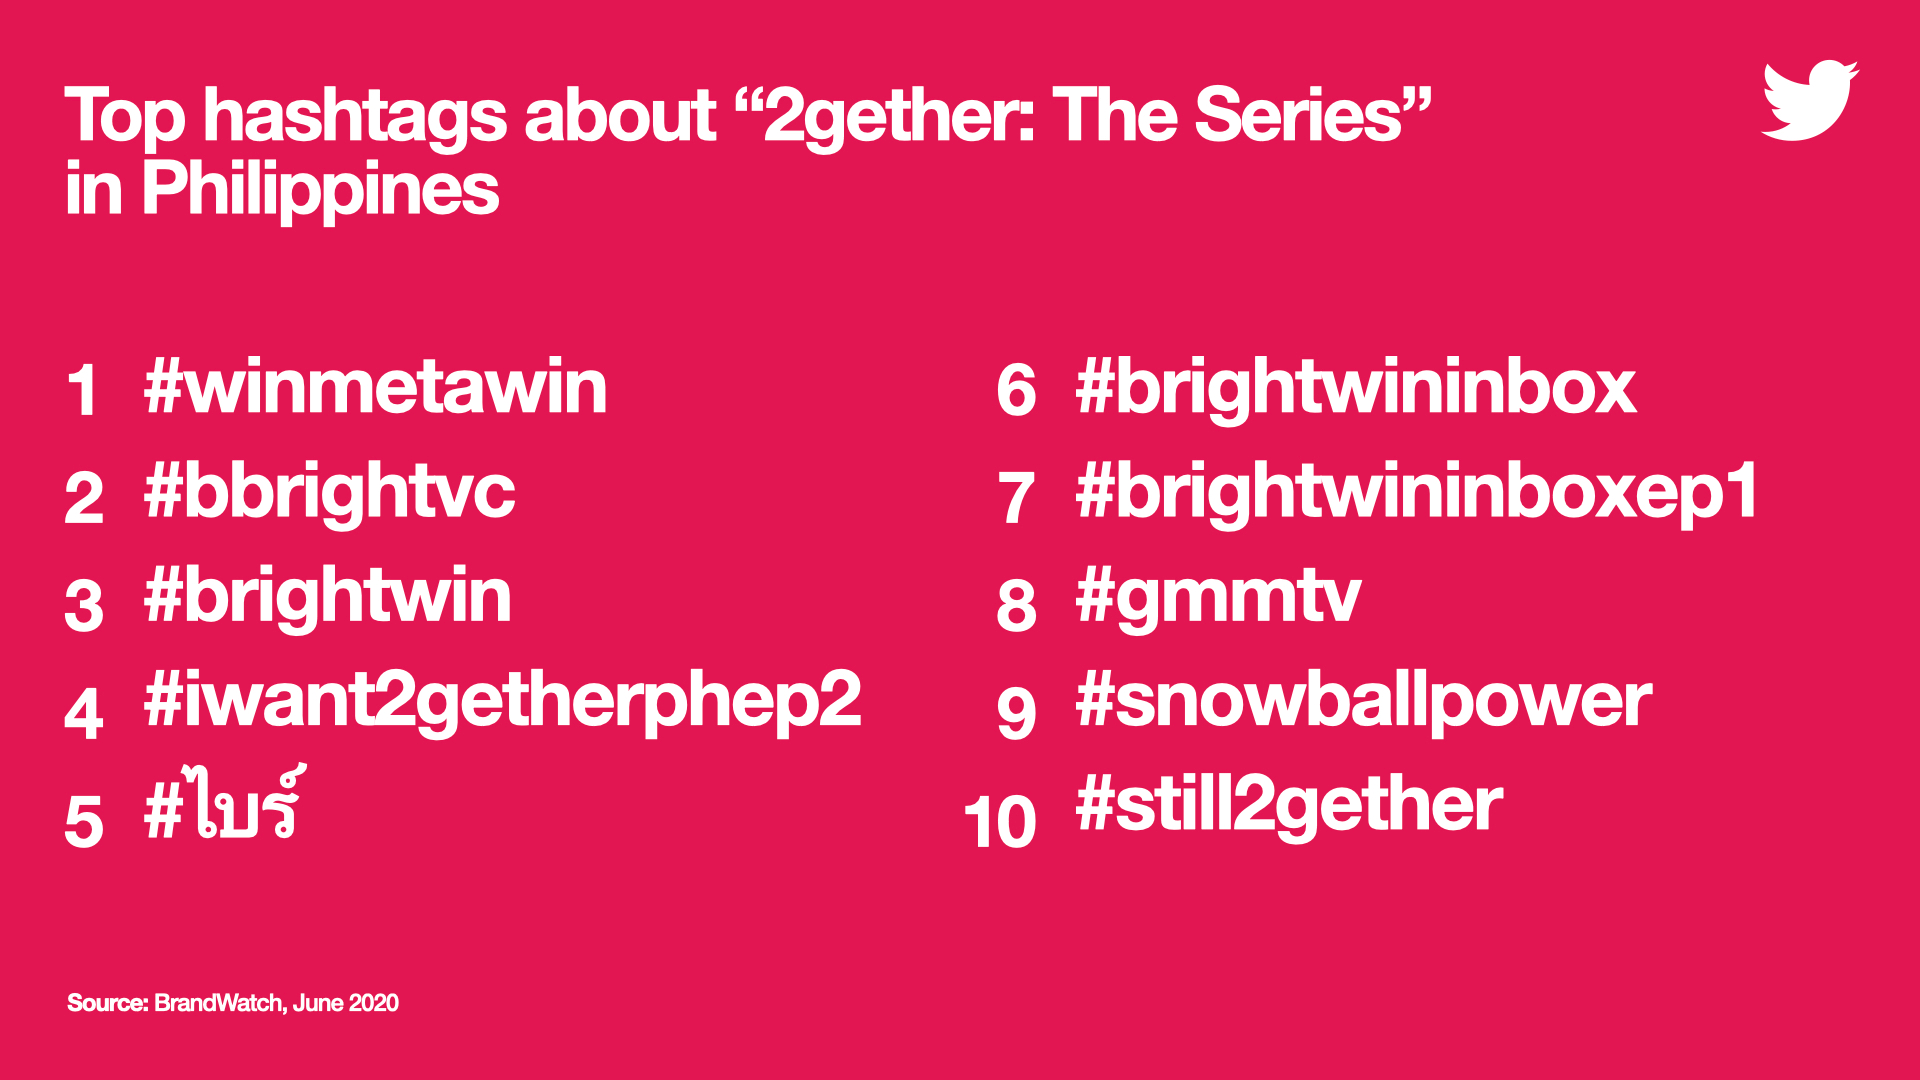 #2getherTheSeriesPH won the hearts of Filipino fans on Twitter